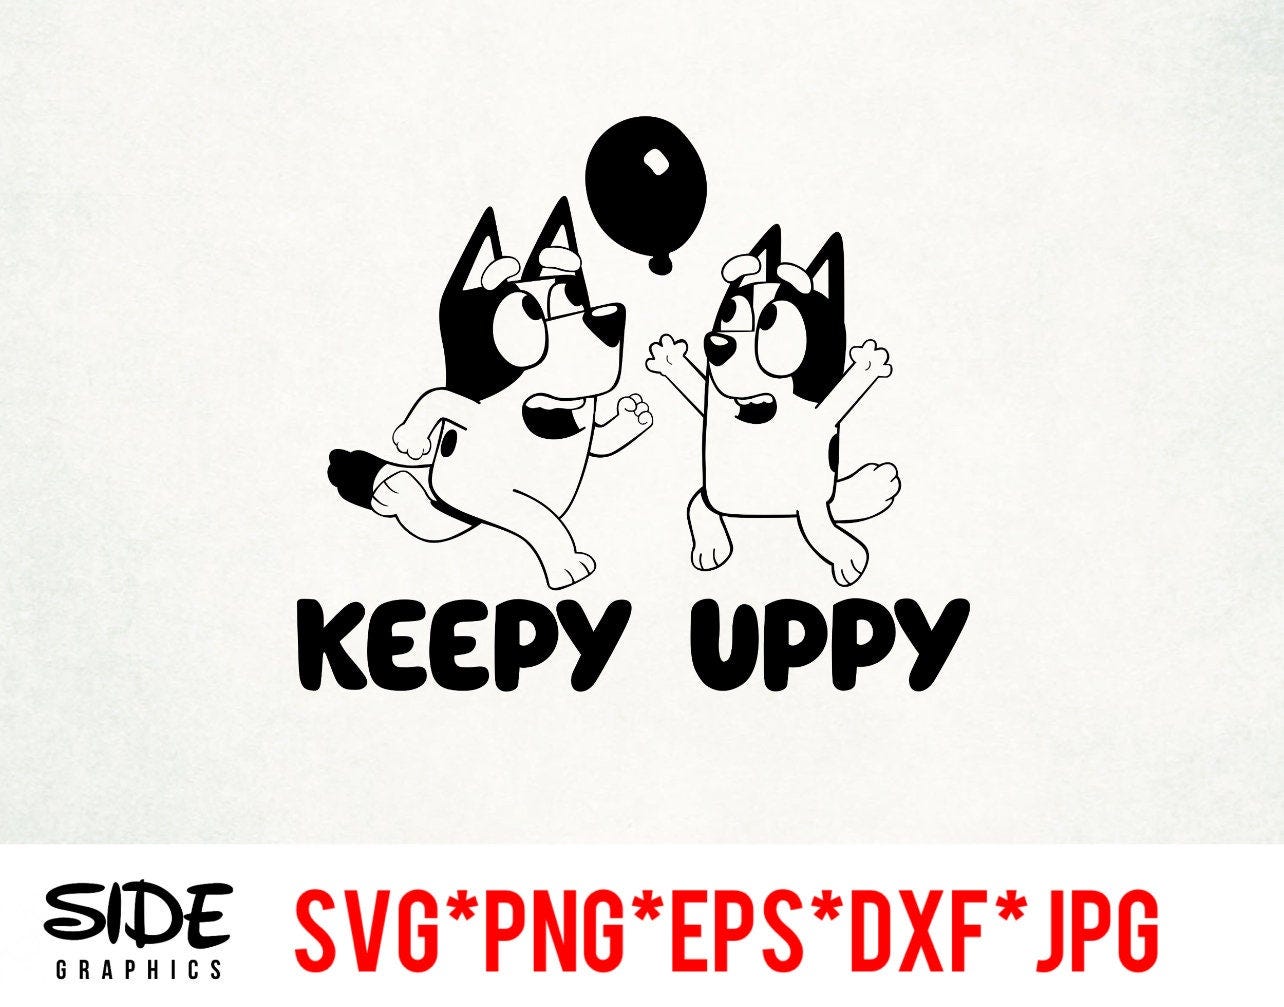 Keepy Uppy instant download digital file svg, png, eps, jpg, and dxf clip art for cricut silhouette and other cutting software